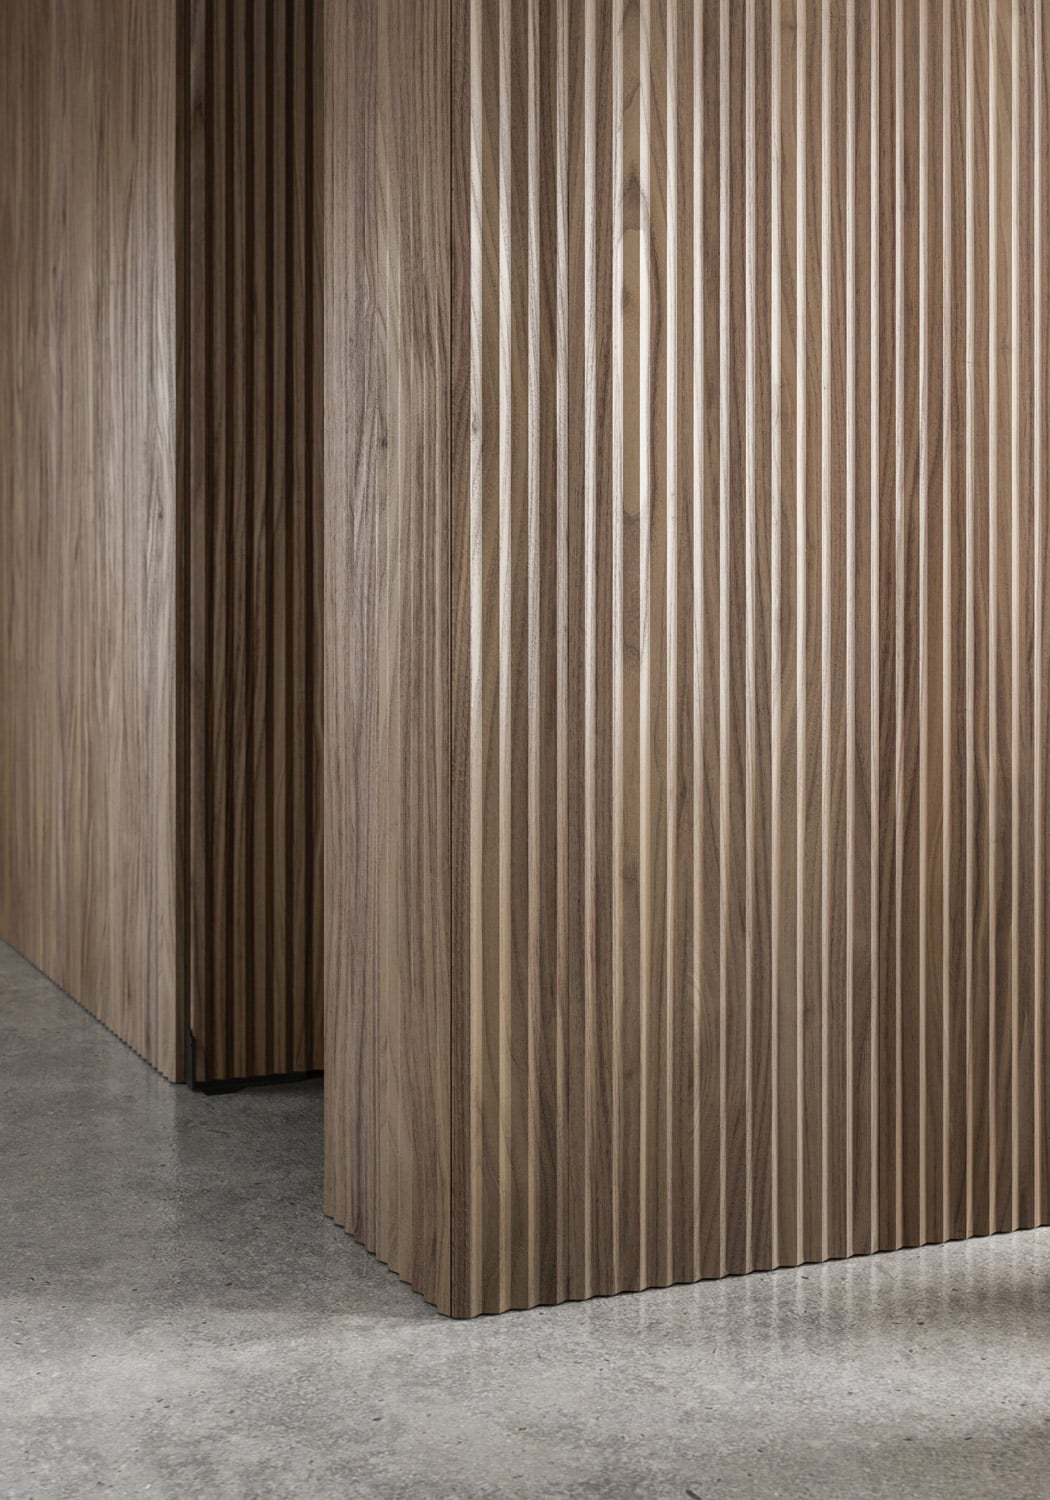 All kitchen storage remains hidden behind the beauty of the ribbed Canaletto Walnut panels.